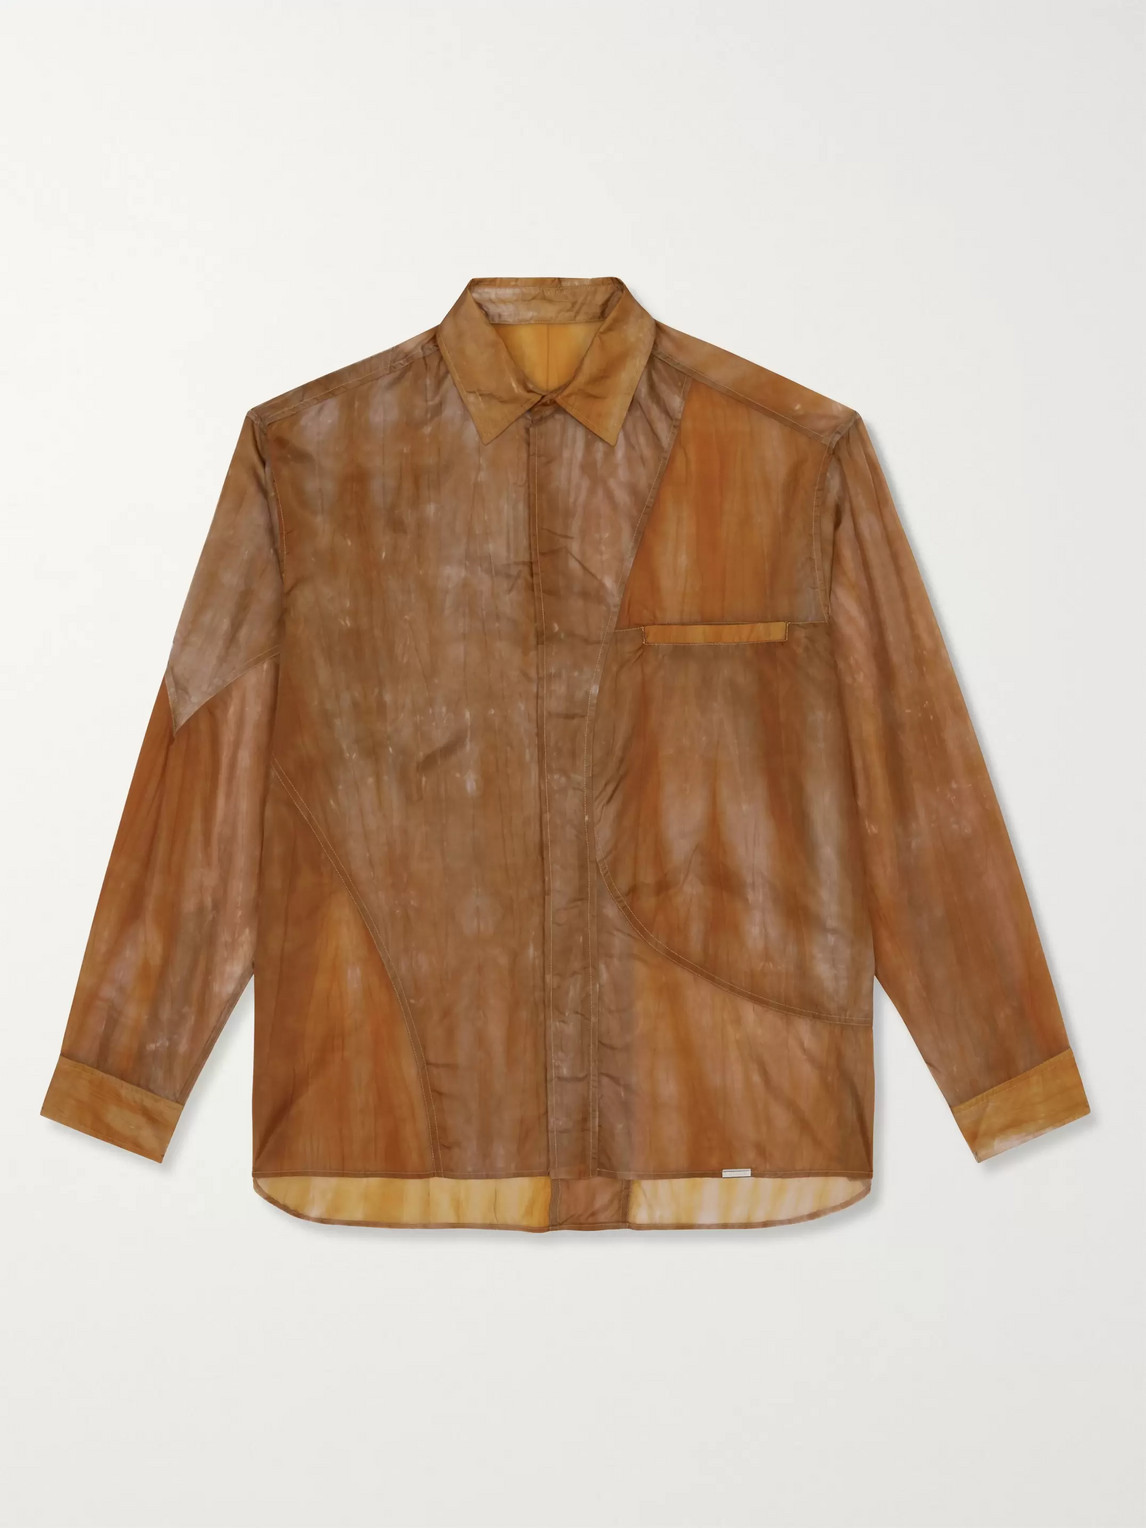 A-COLD-WALL* CORTEN TIE-DYED NYLON SHIRT